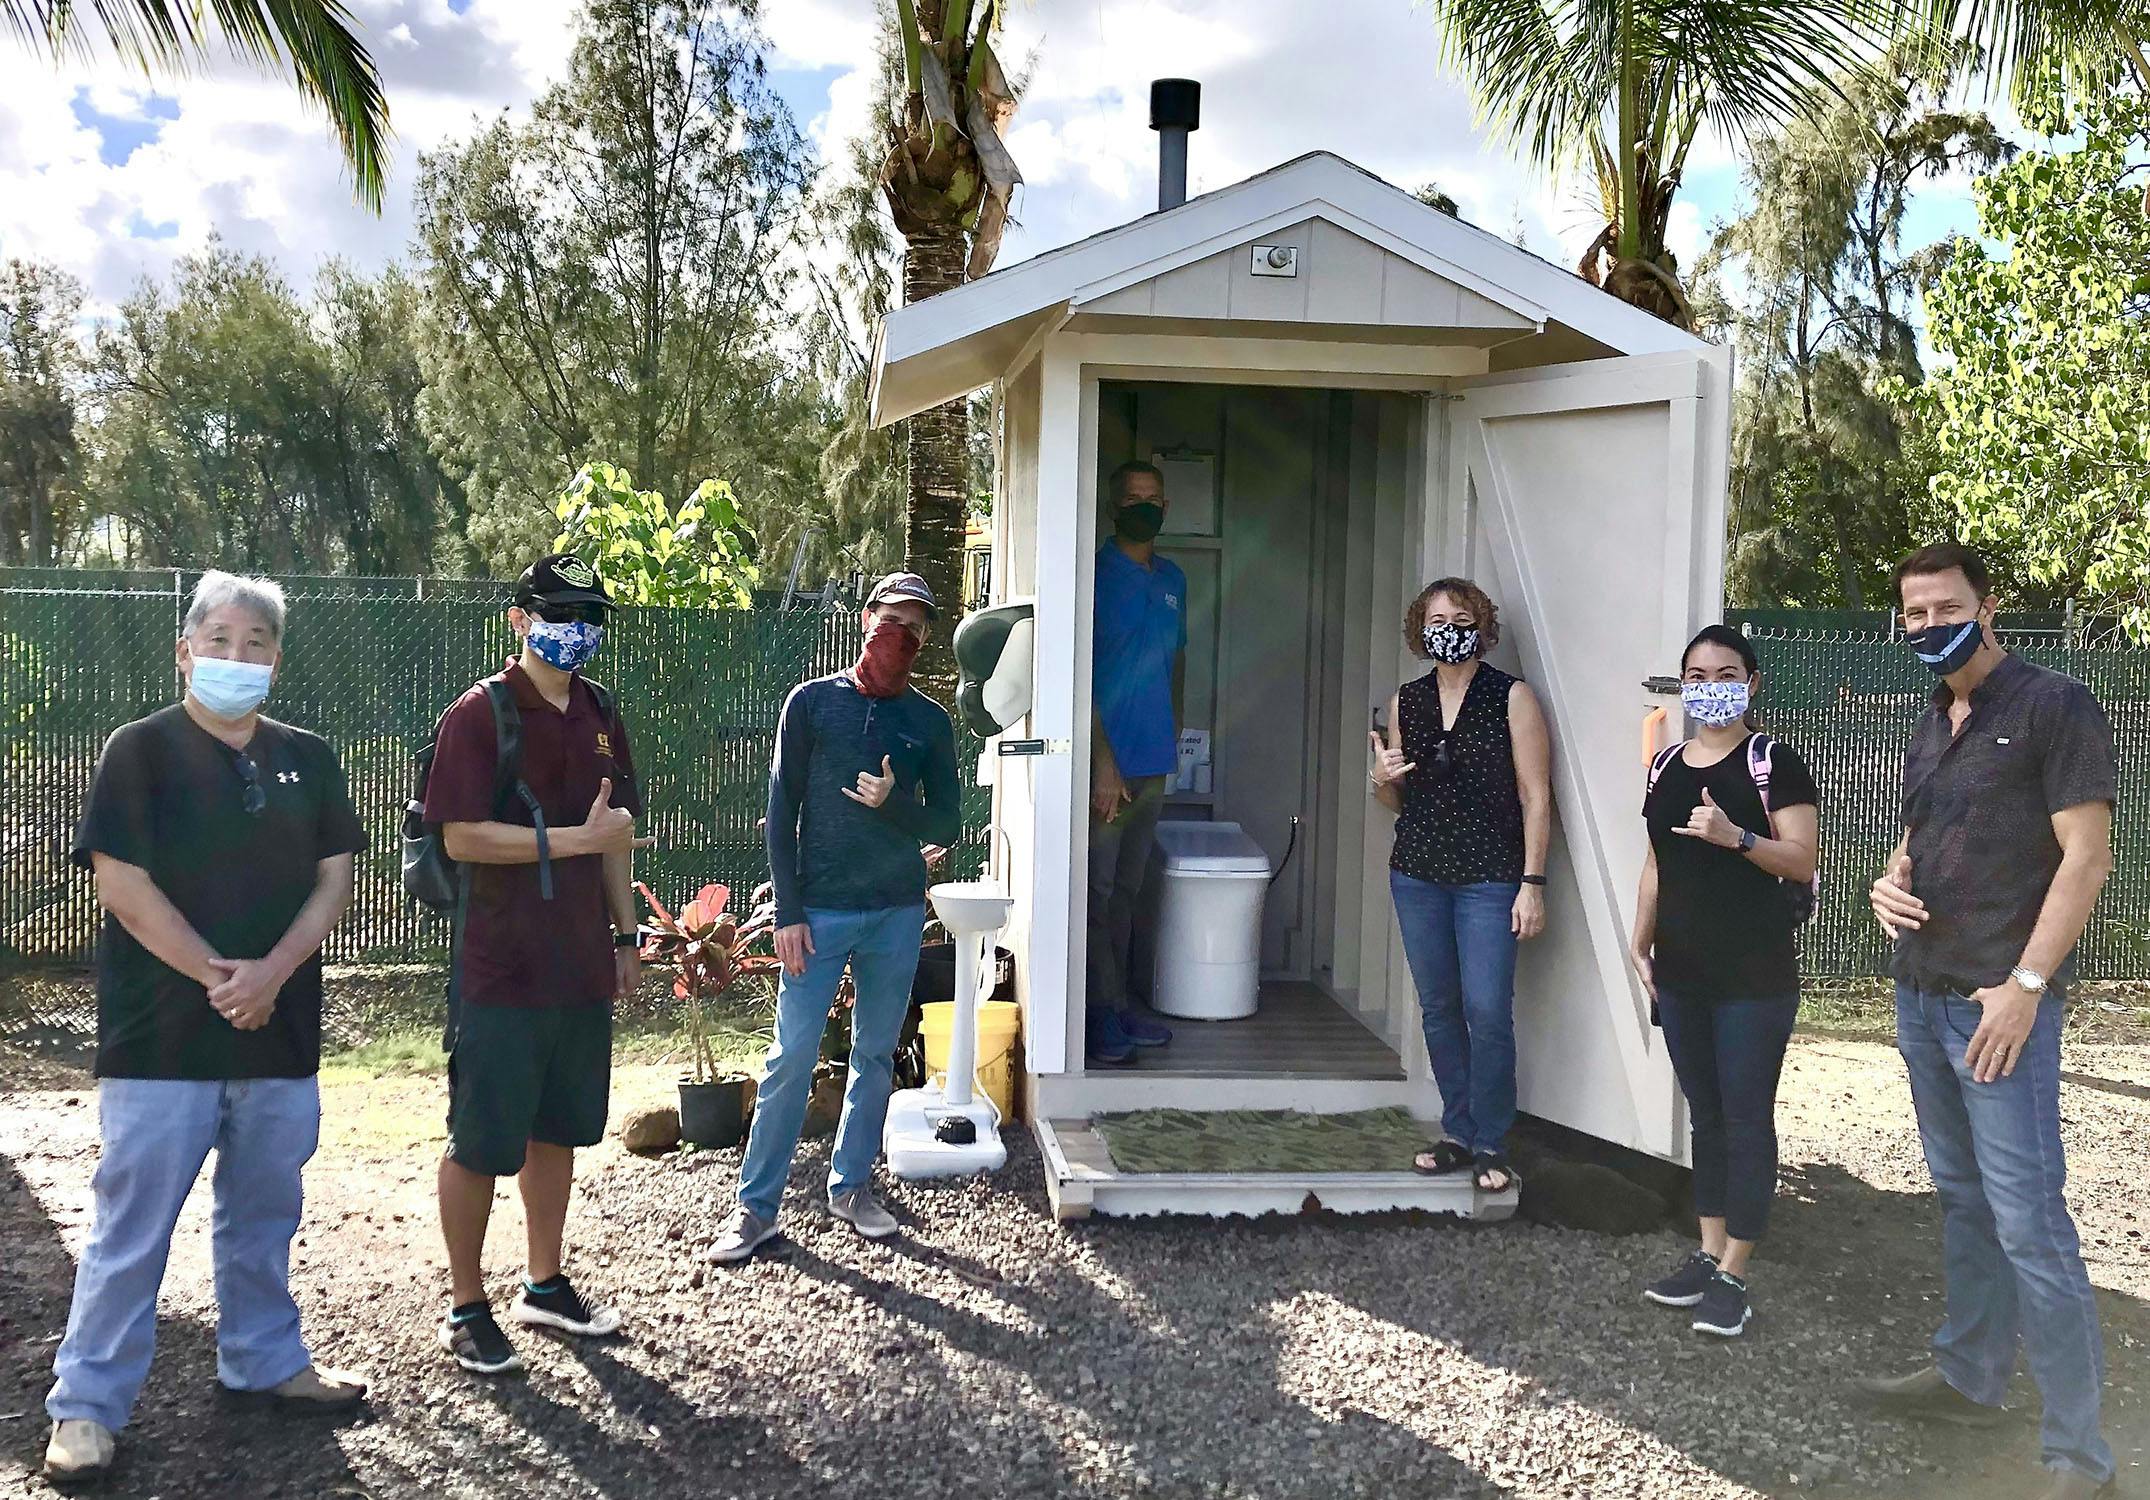 Group of people standing in front of an outdoor Cinderella Incineration Toilet